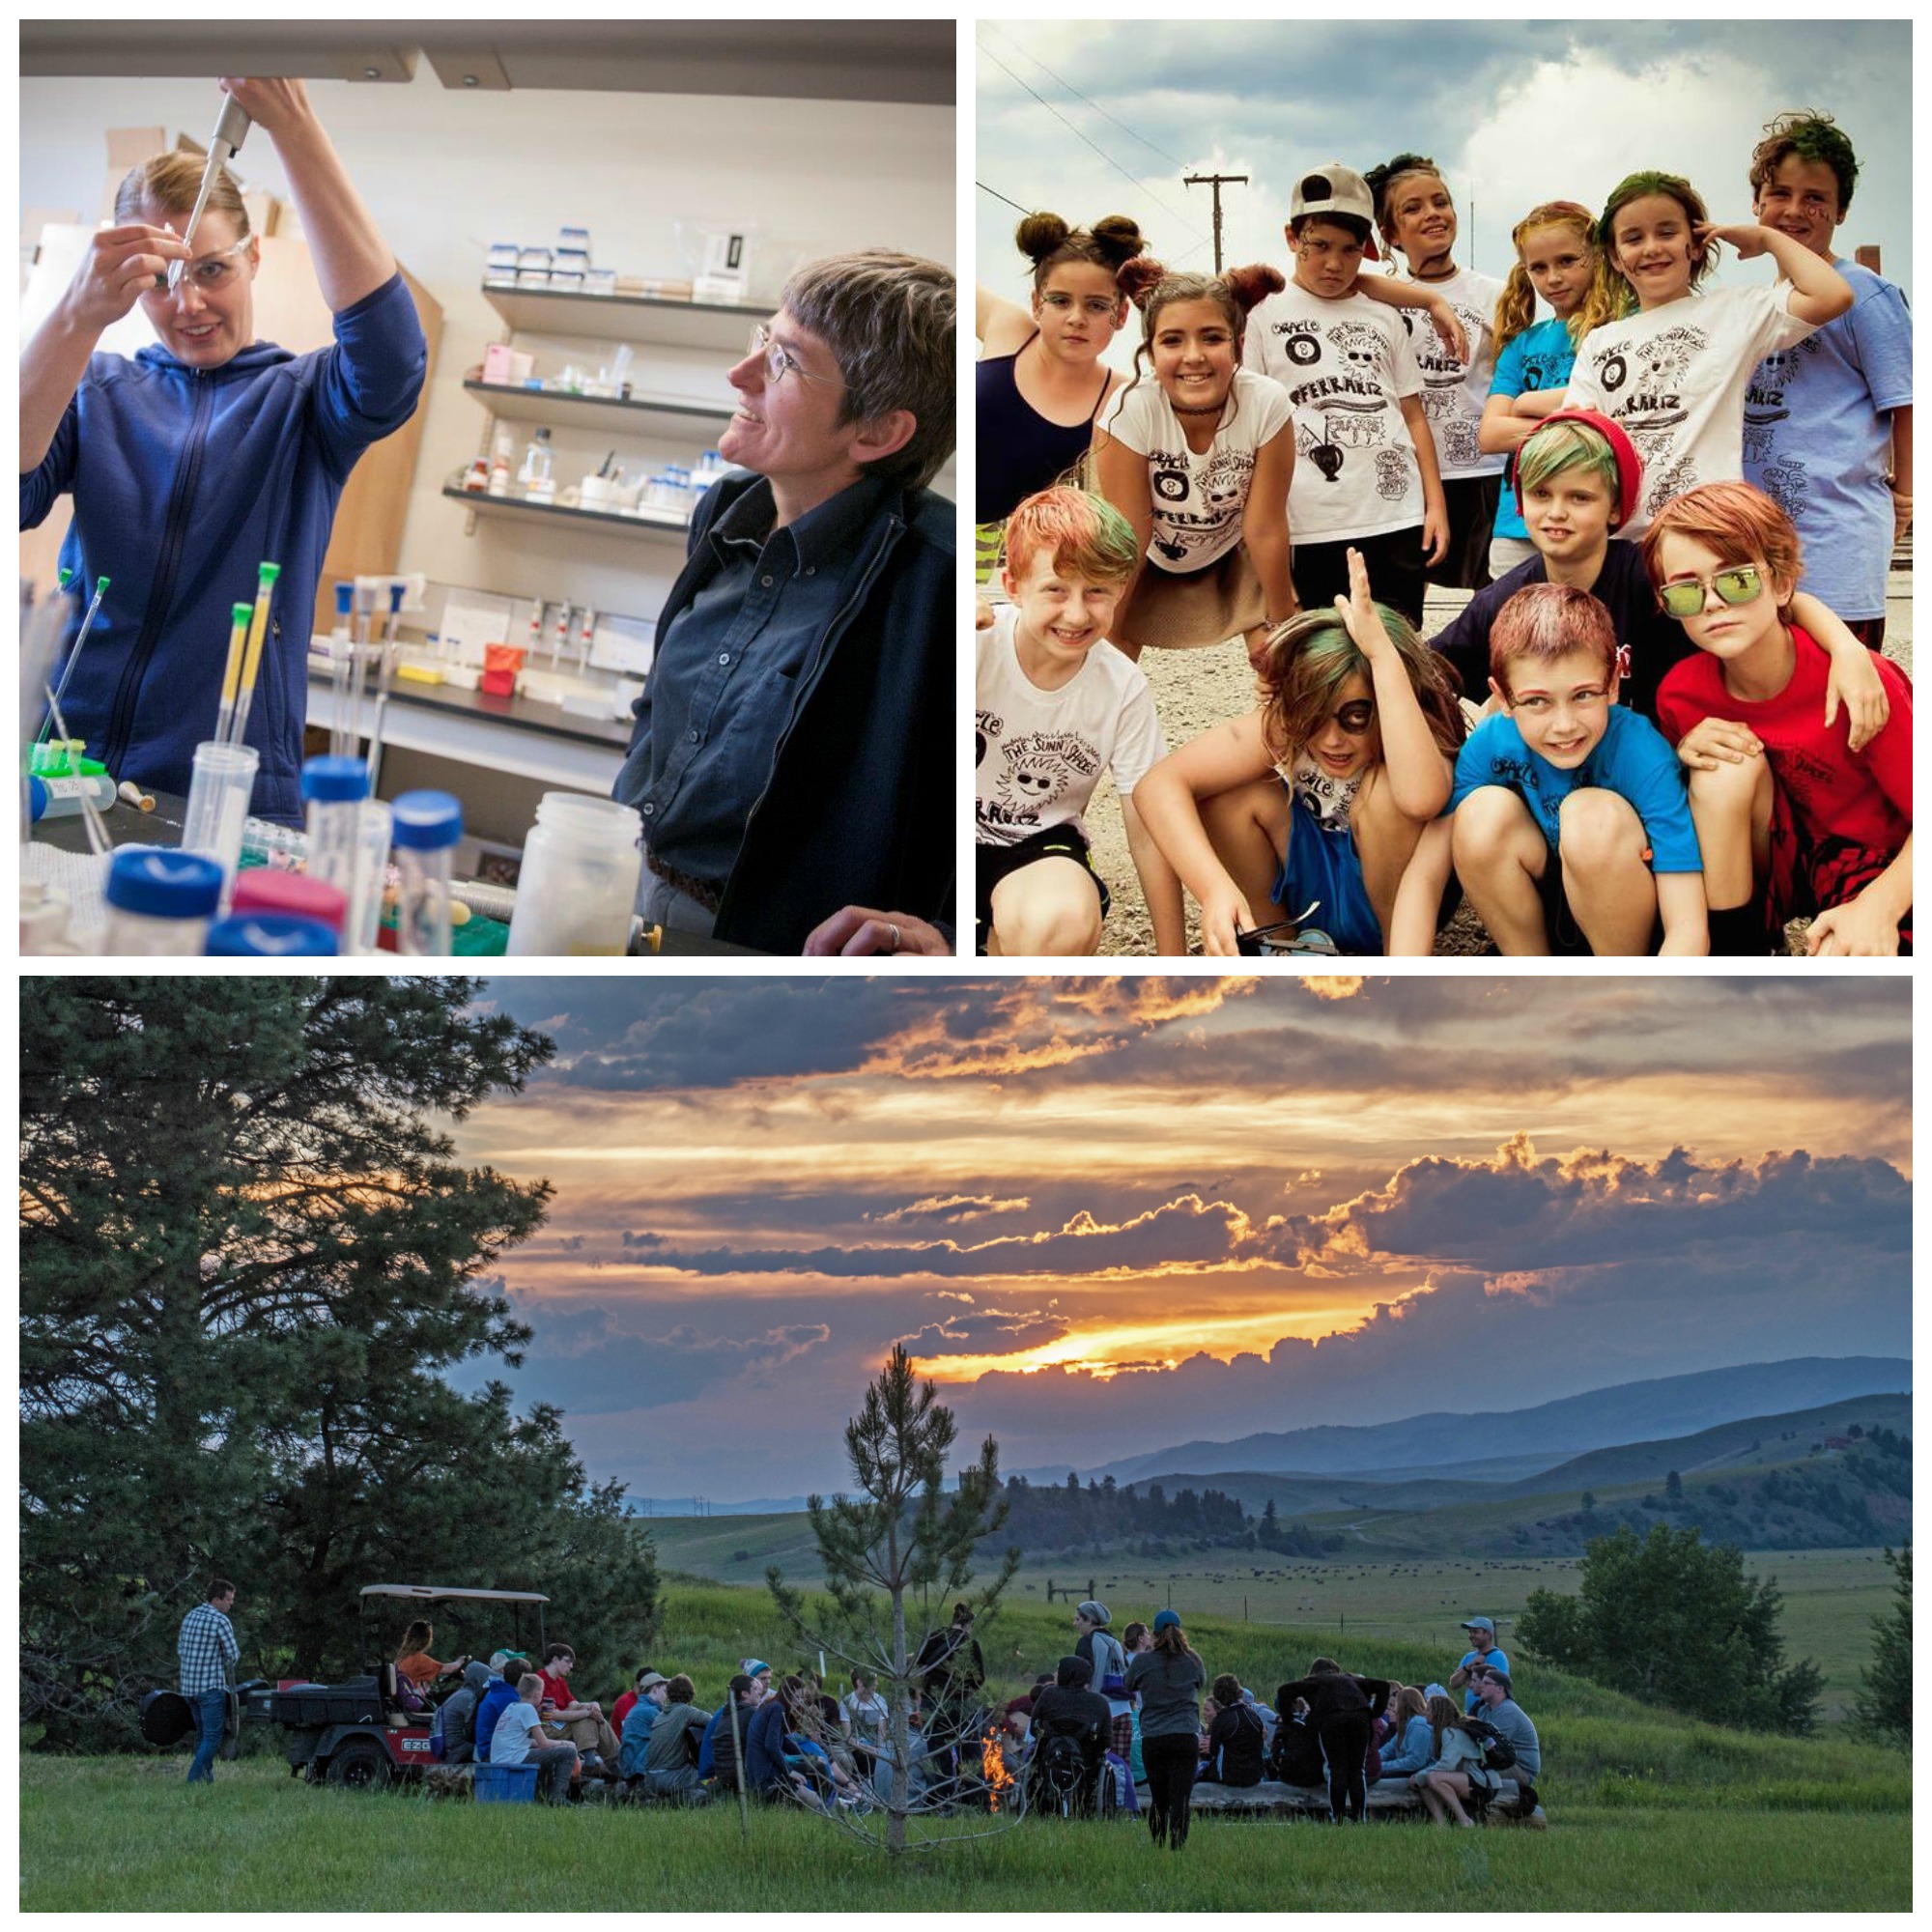 Image 1: two people in a lab perform a science experiment. Image 2: a group of children wearing camp t-shirts smile for the camera outside. Image 3: an outdoor shot of a group of people gathered around a campfire, with rolling hills, mountains, and a sunset behind them. 